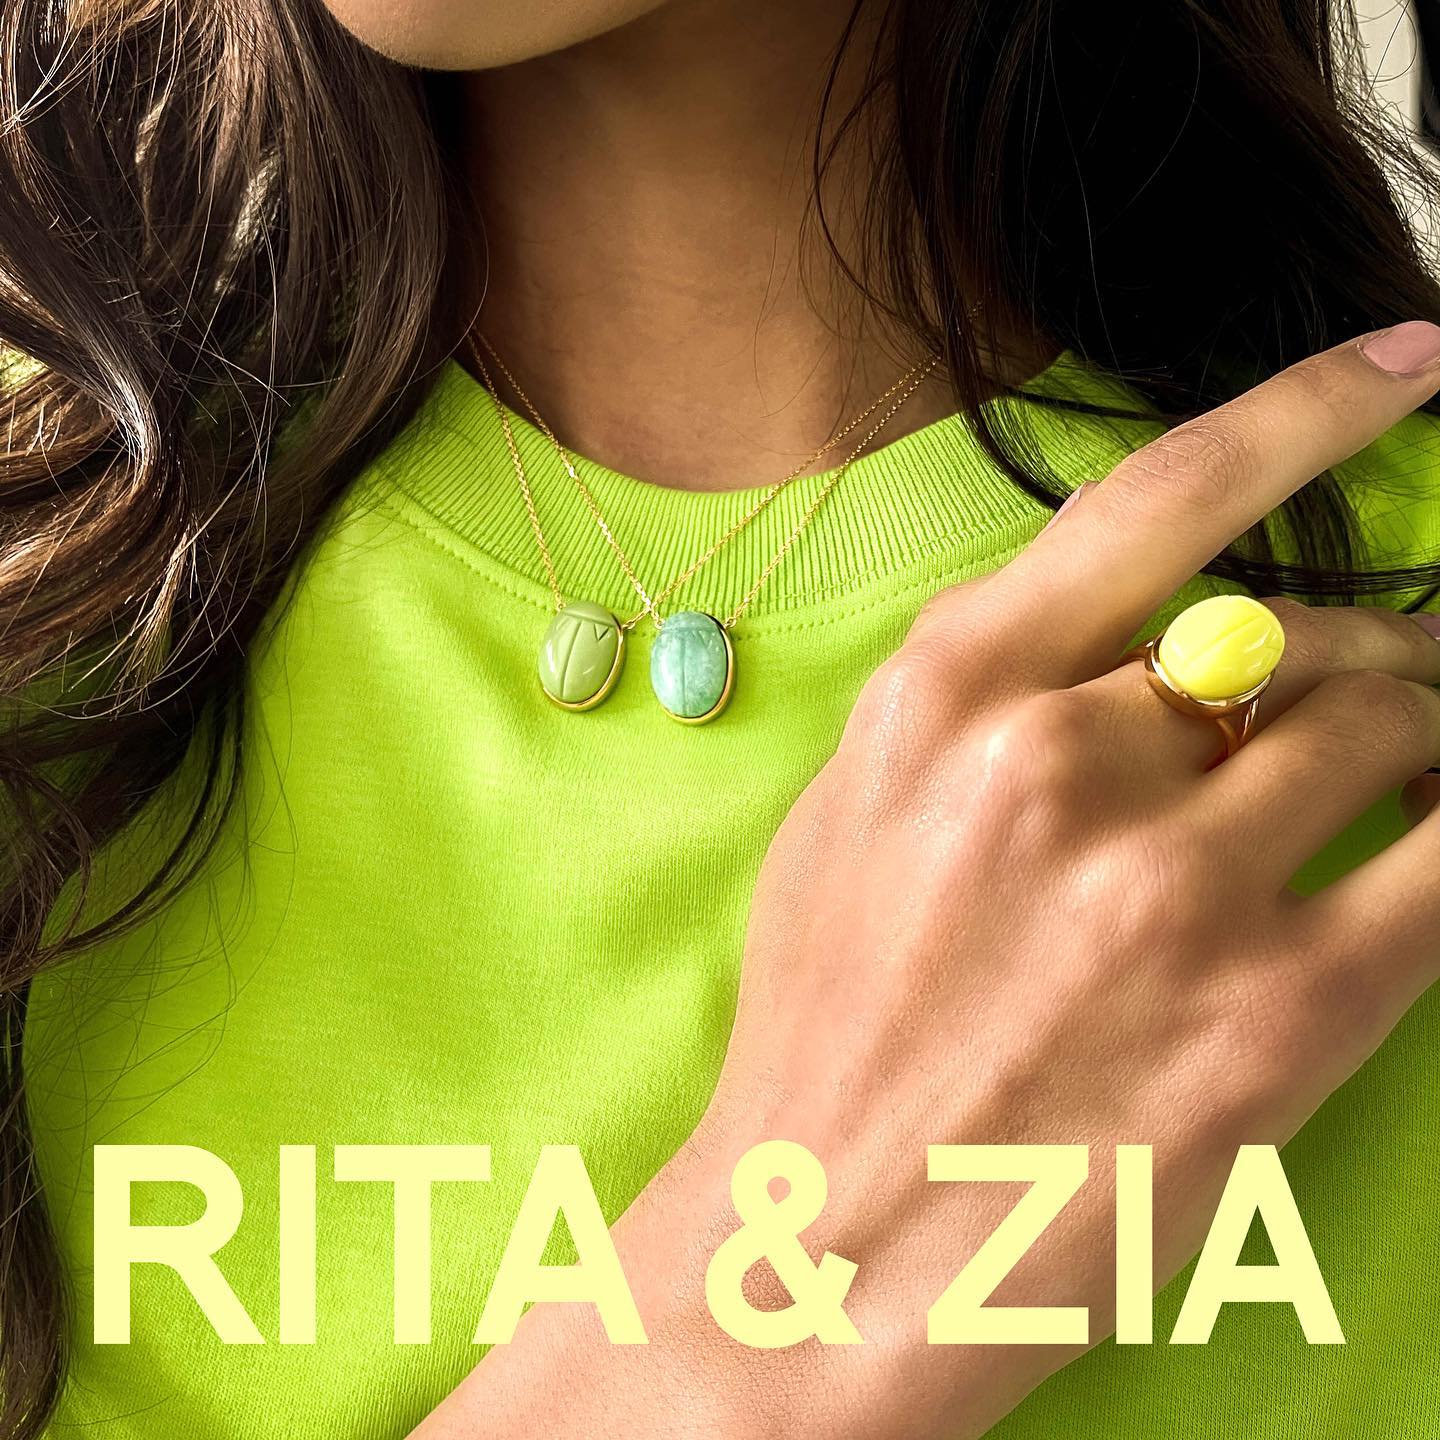 Too much? Or never enough? 

Scarabée Collection in Gold Plated Silver - Fluo Galalithe necklace and ring & Turquoise necklace. #myritazia
.
.
.
.
.
#jewelryfashion #jewelryblogger #jewerly #jewels #trendyjewelry #jewelrylovers #handmadejewelry #jewelrylover #jewelrydesigner